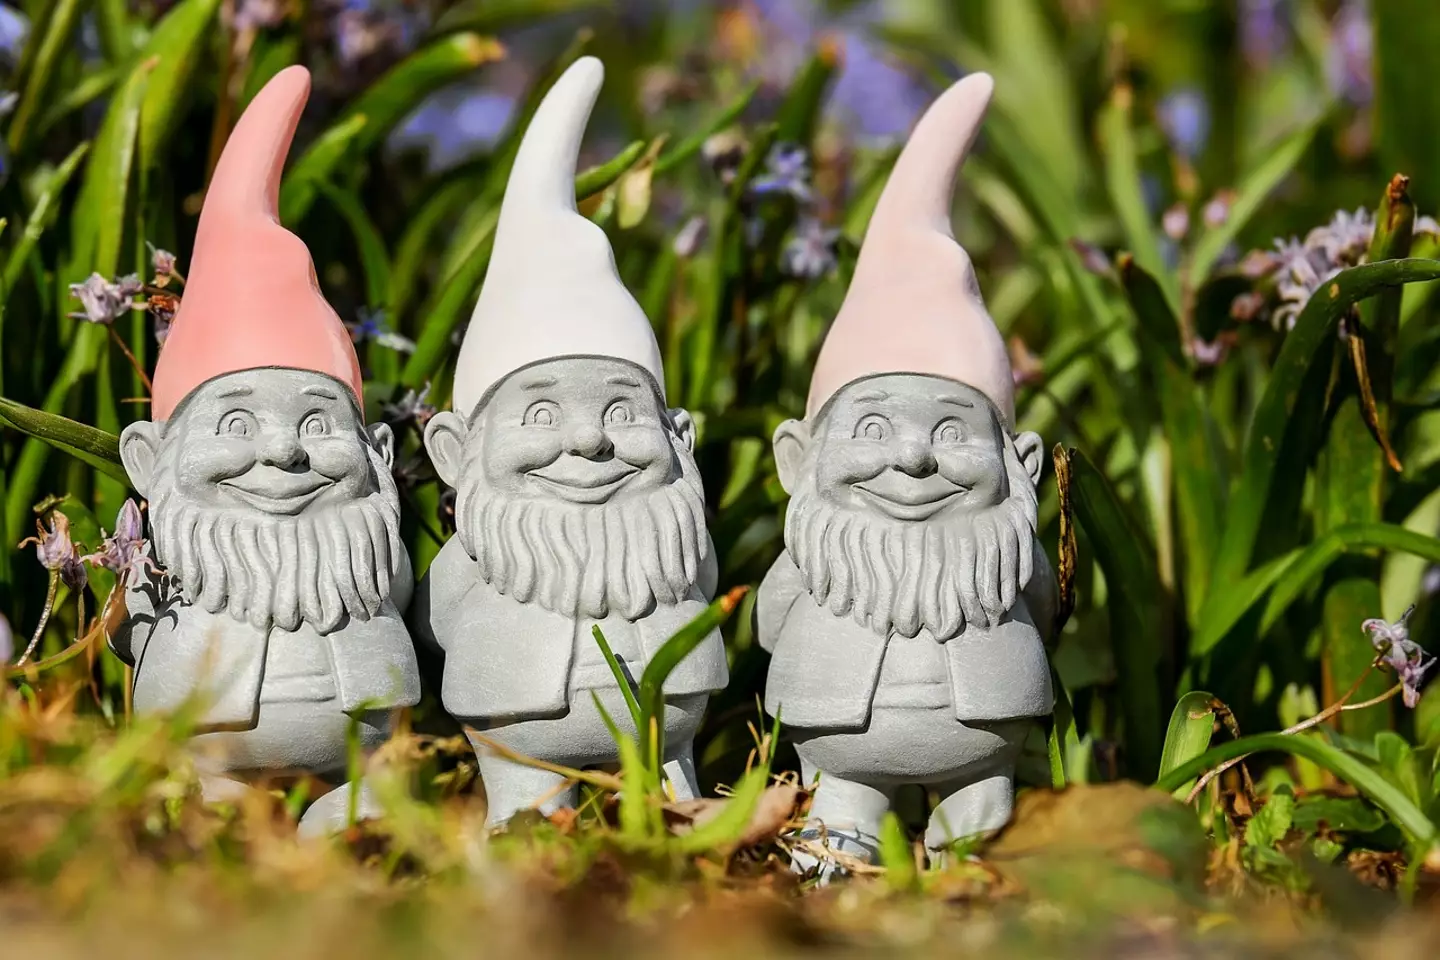 A Californian realtor said a client was advised not to move into a neighbourhood due to homeowners displaying gnomes.